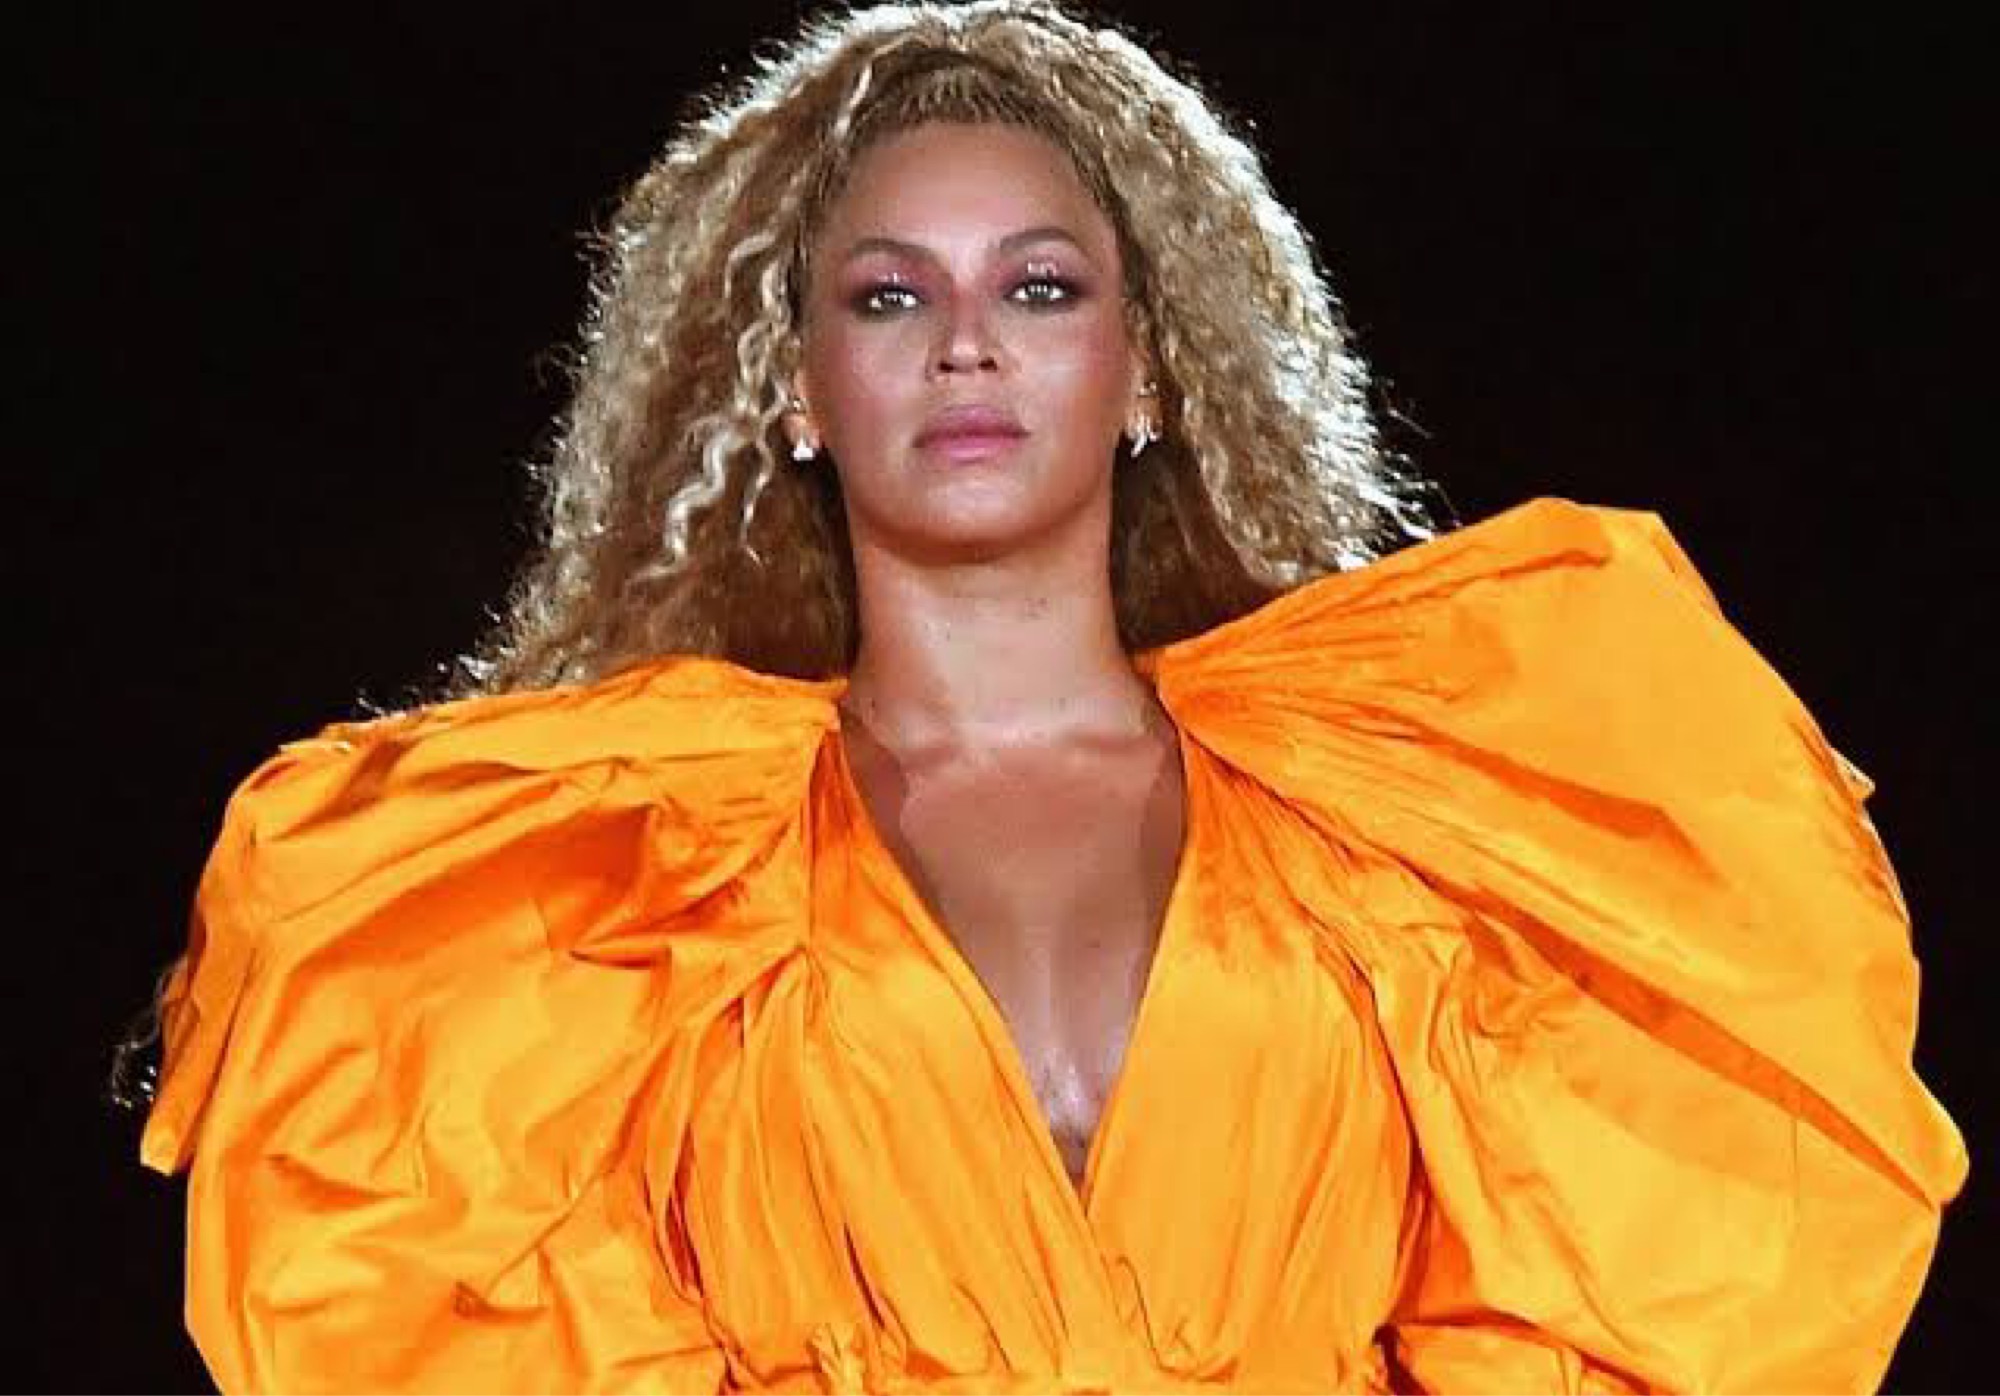 #EndSARS: “I Am Heartbroken To See The Senseless Brutality Taking Place In Nigeria” - Beyoncé